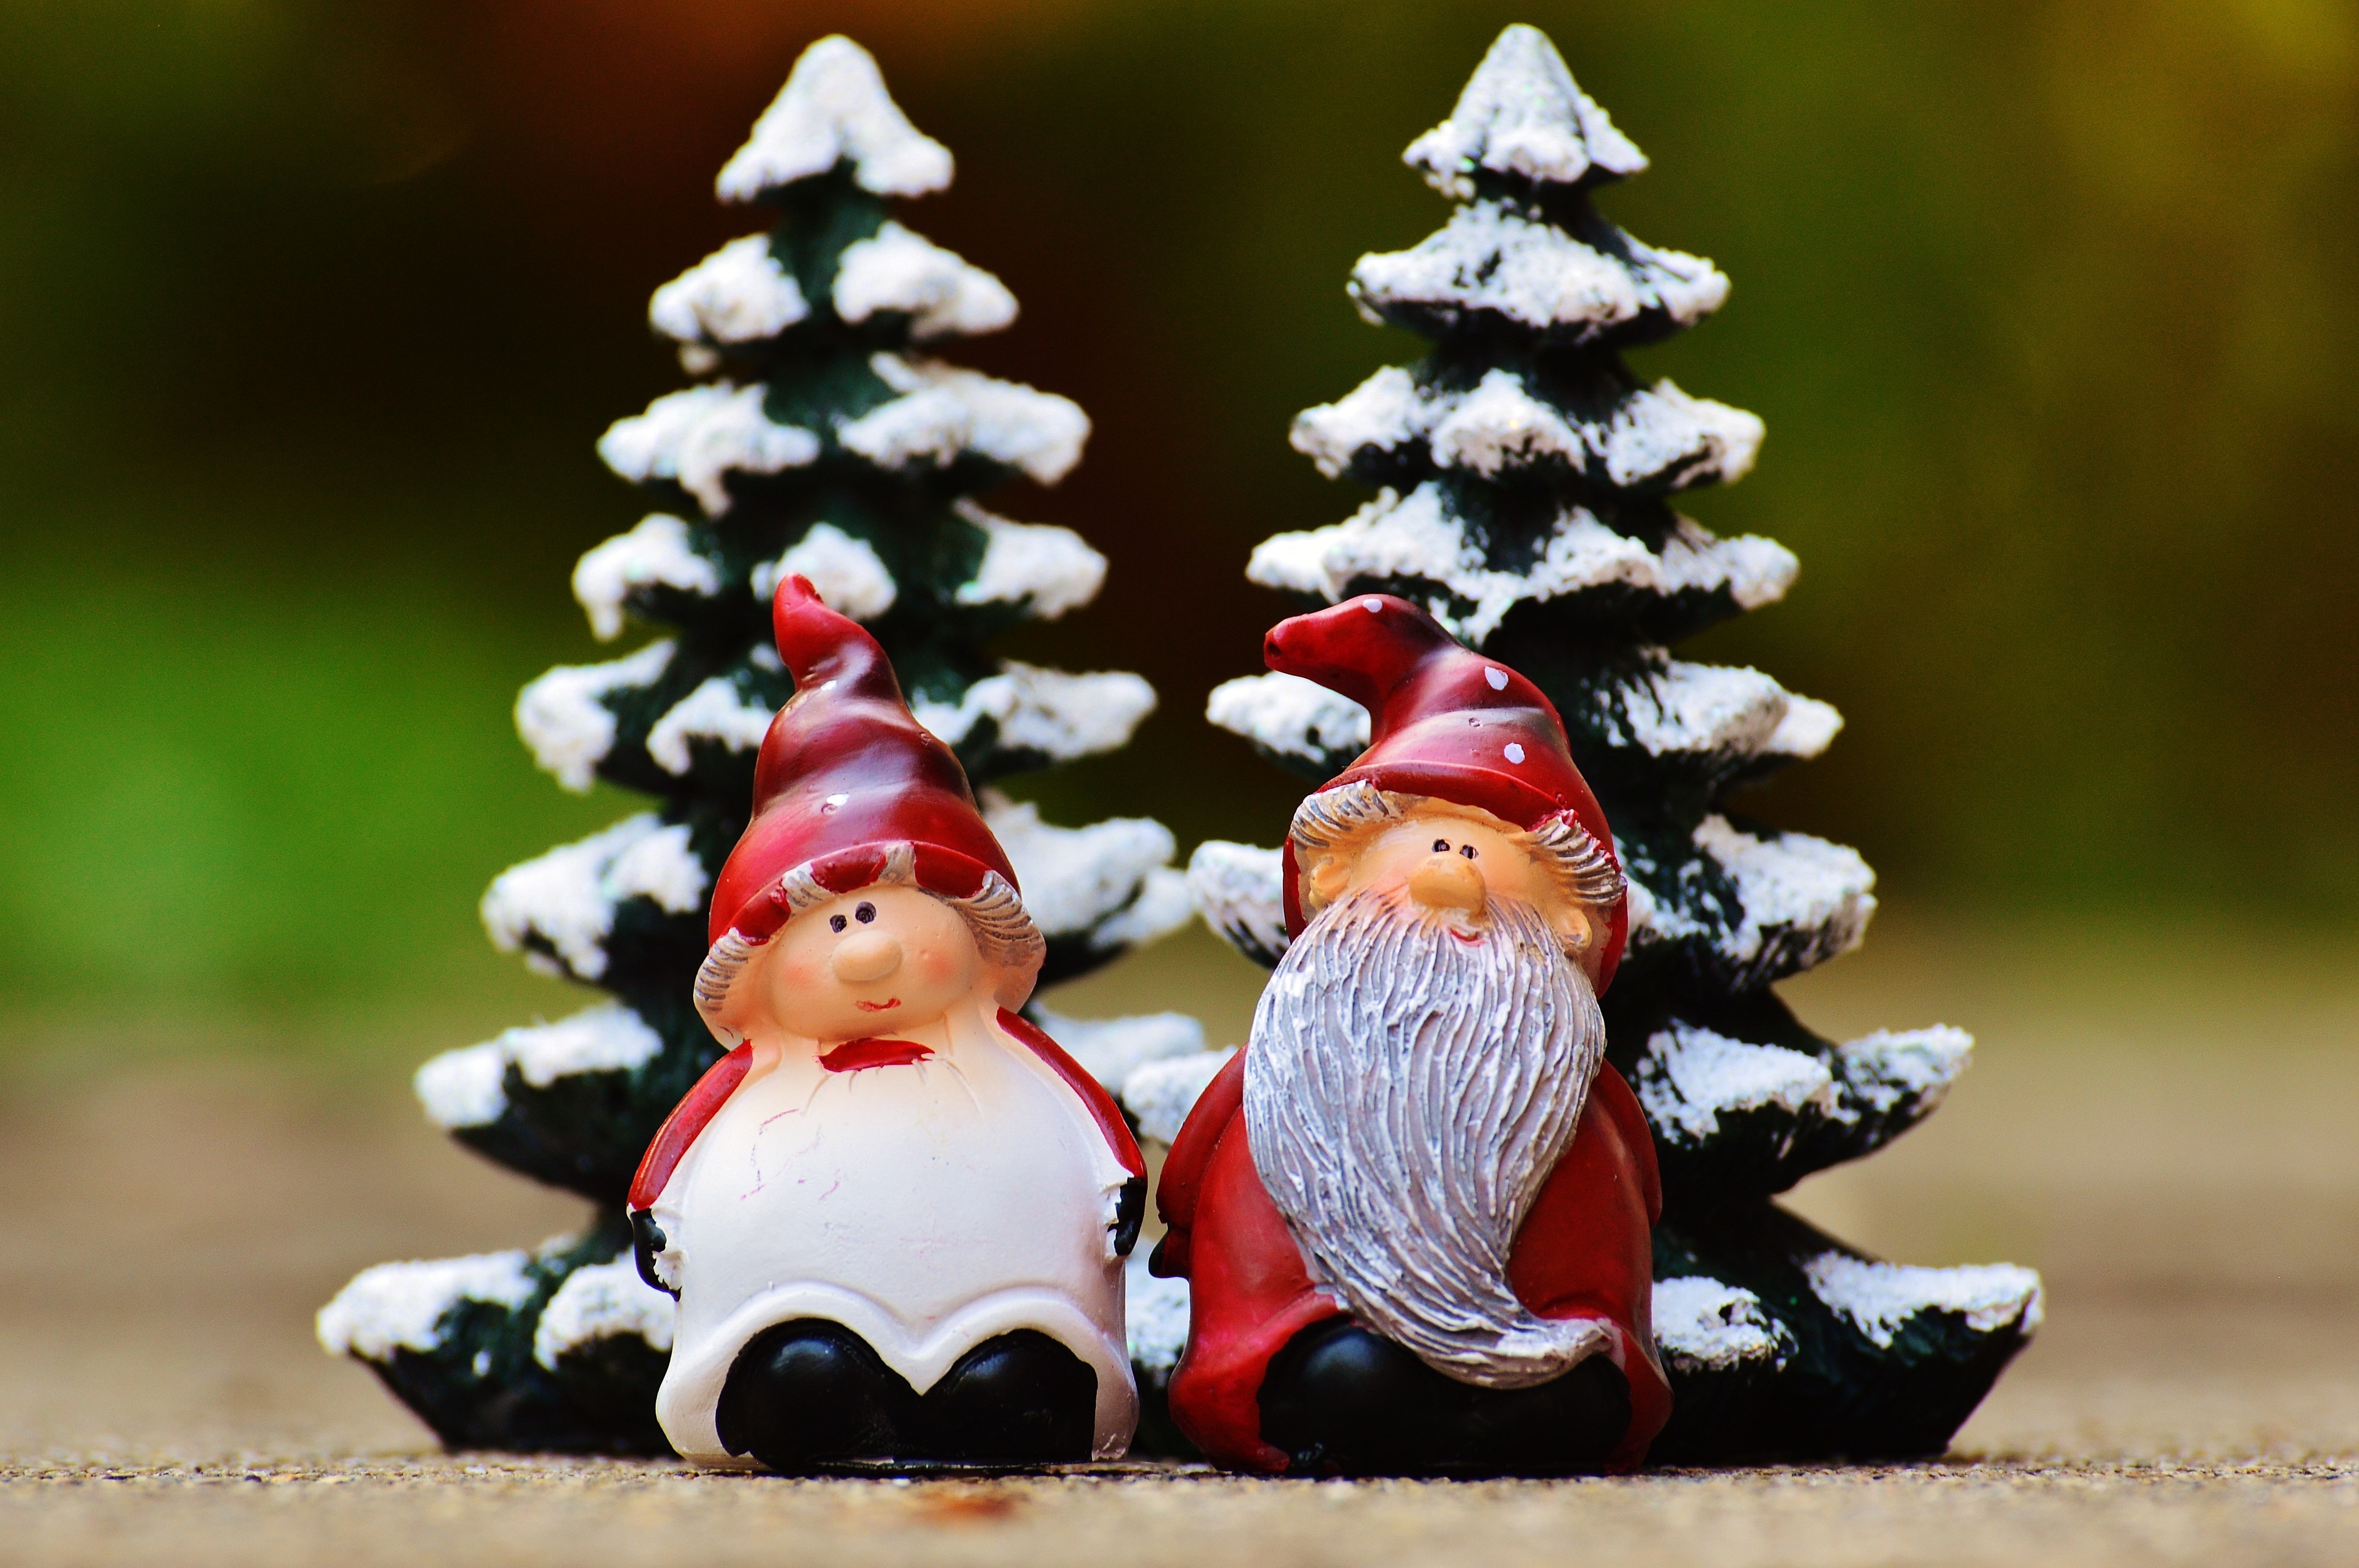 Mr. and Mrs. Claus garden gnome